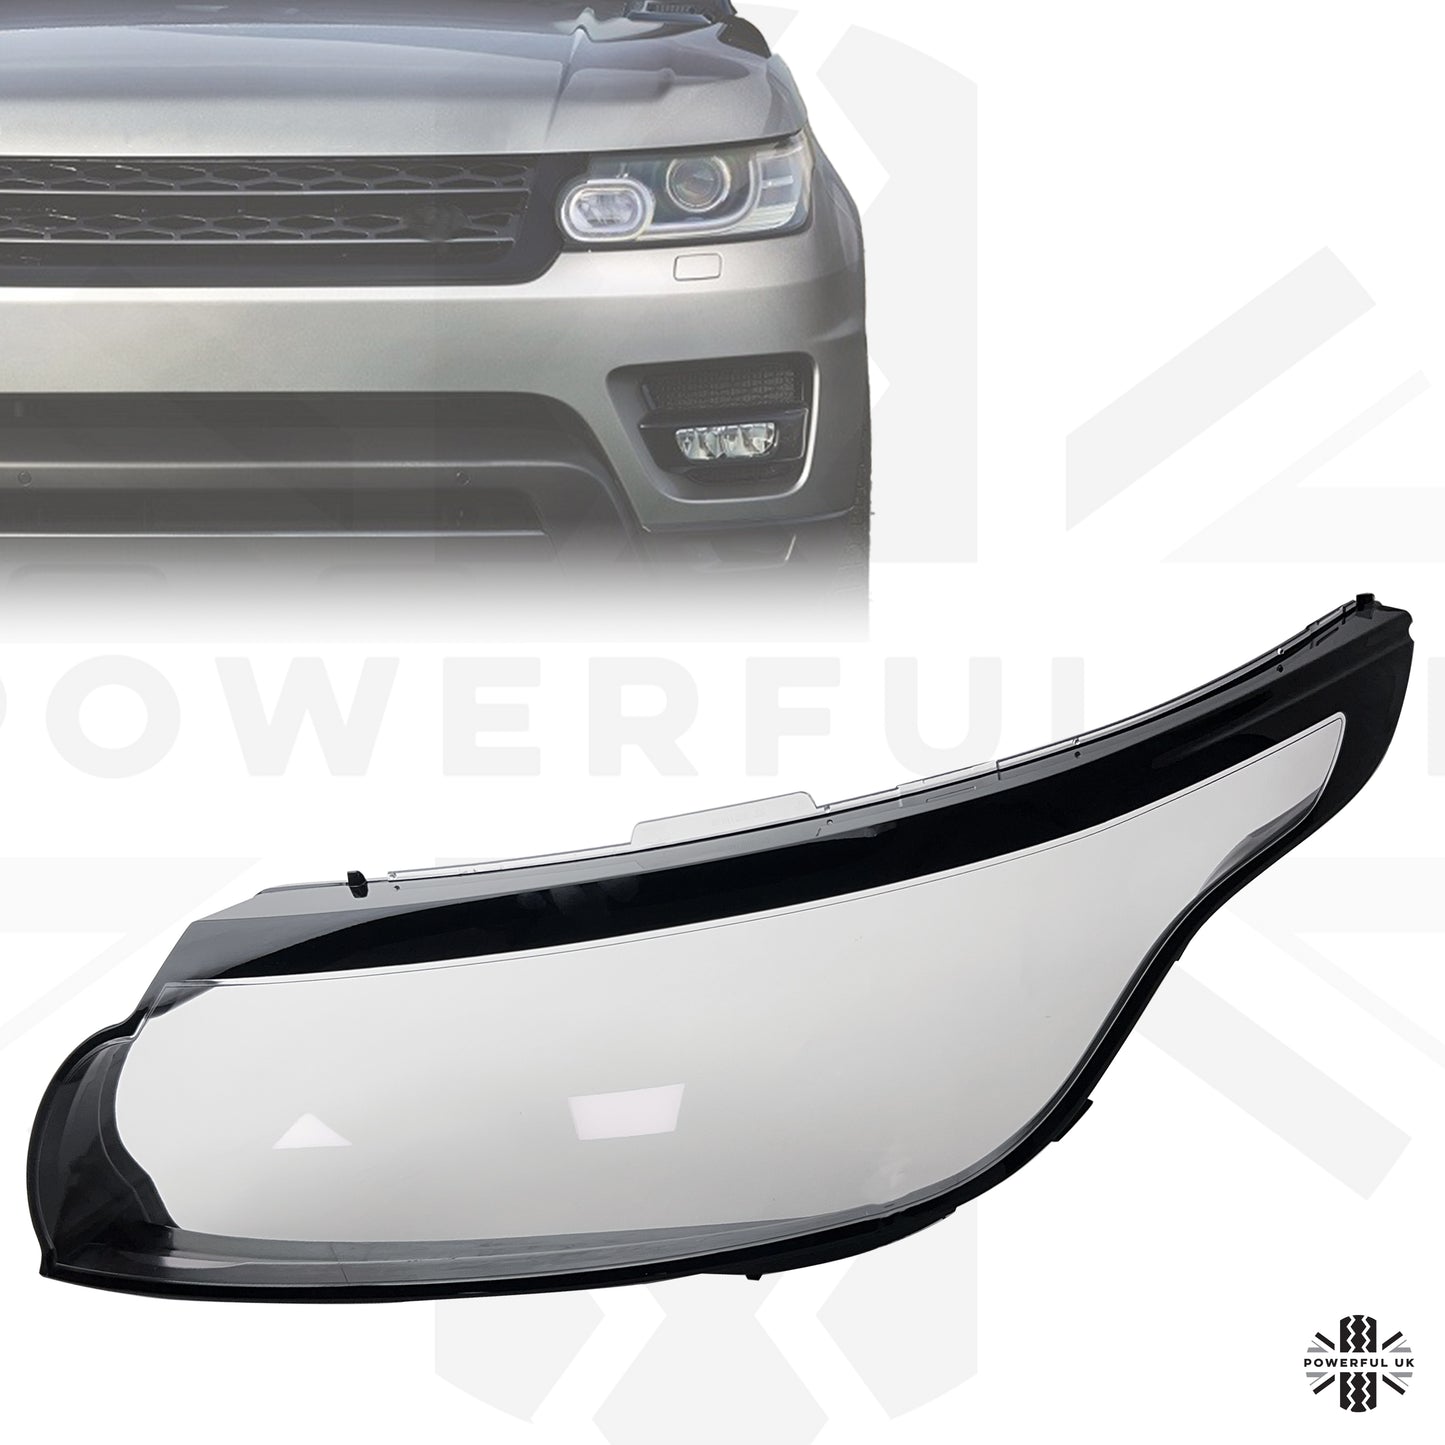 Replacement Headlight Lens for Range Rover Sport 2014-17 - LH